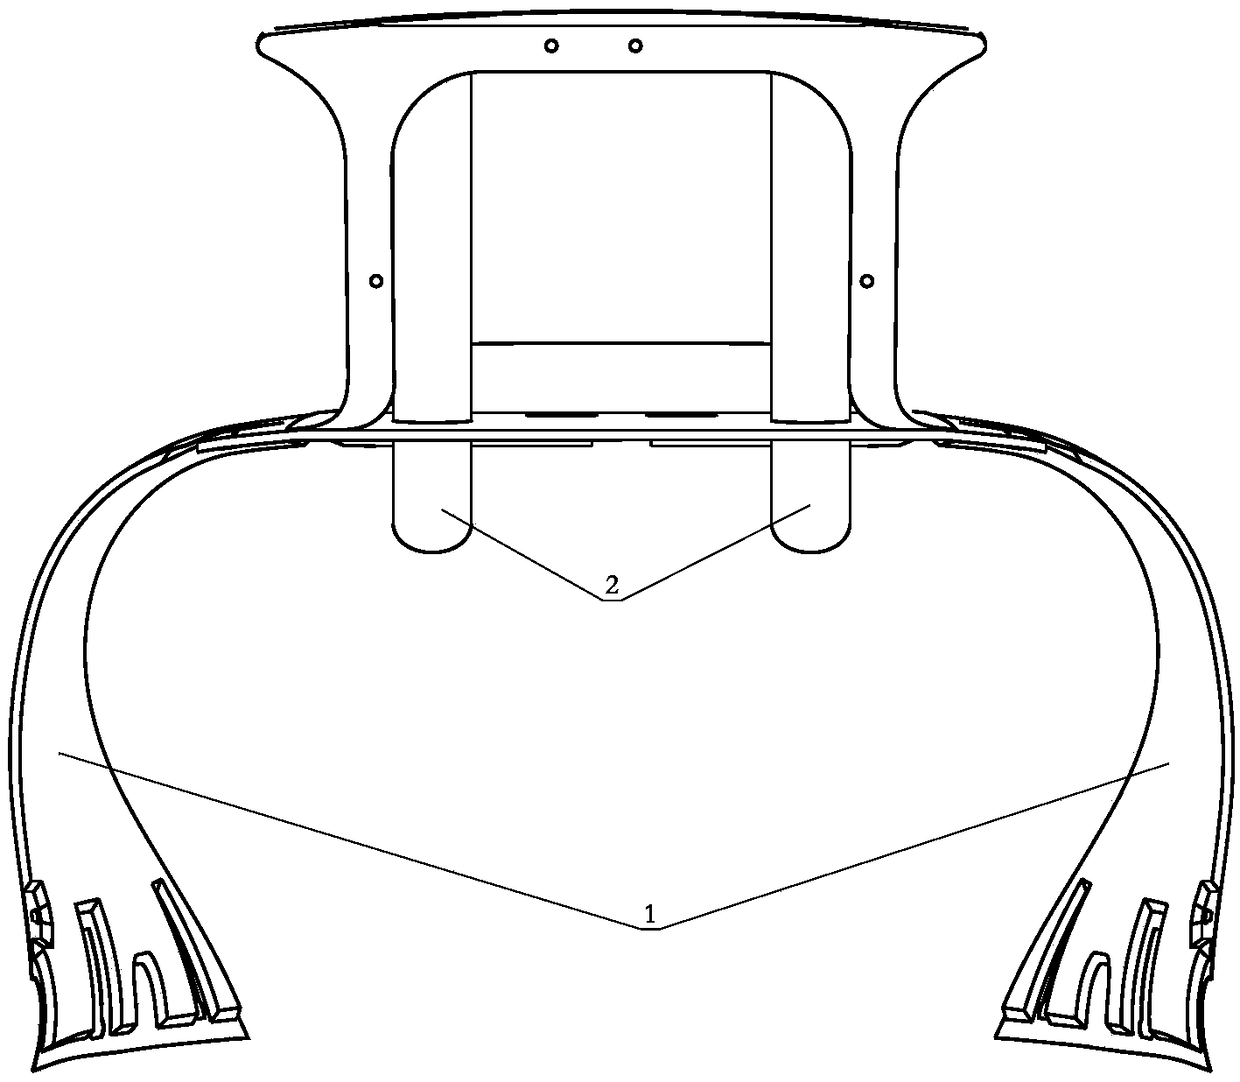 Ventilated and cooled fairing structure